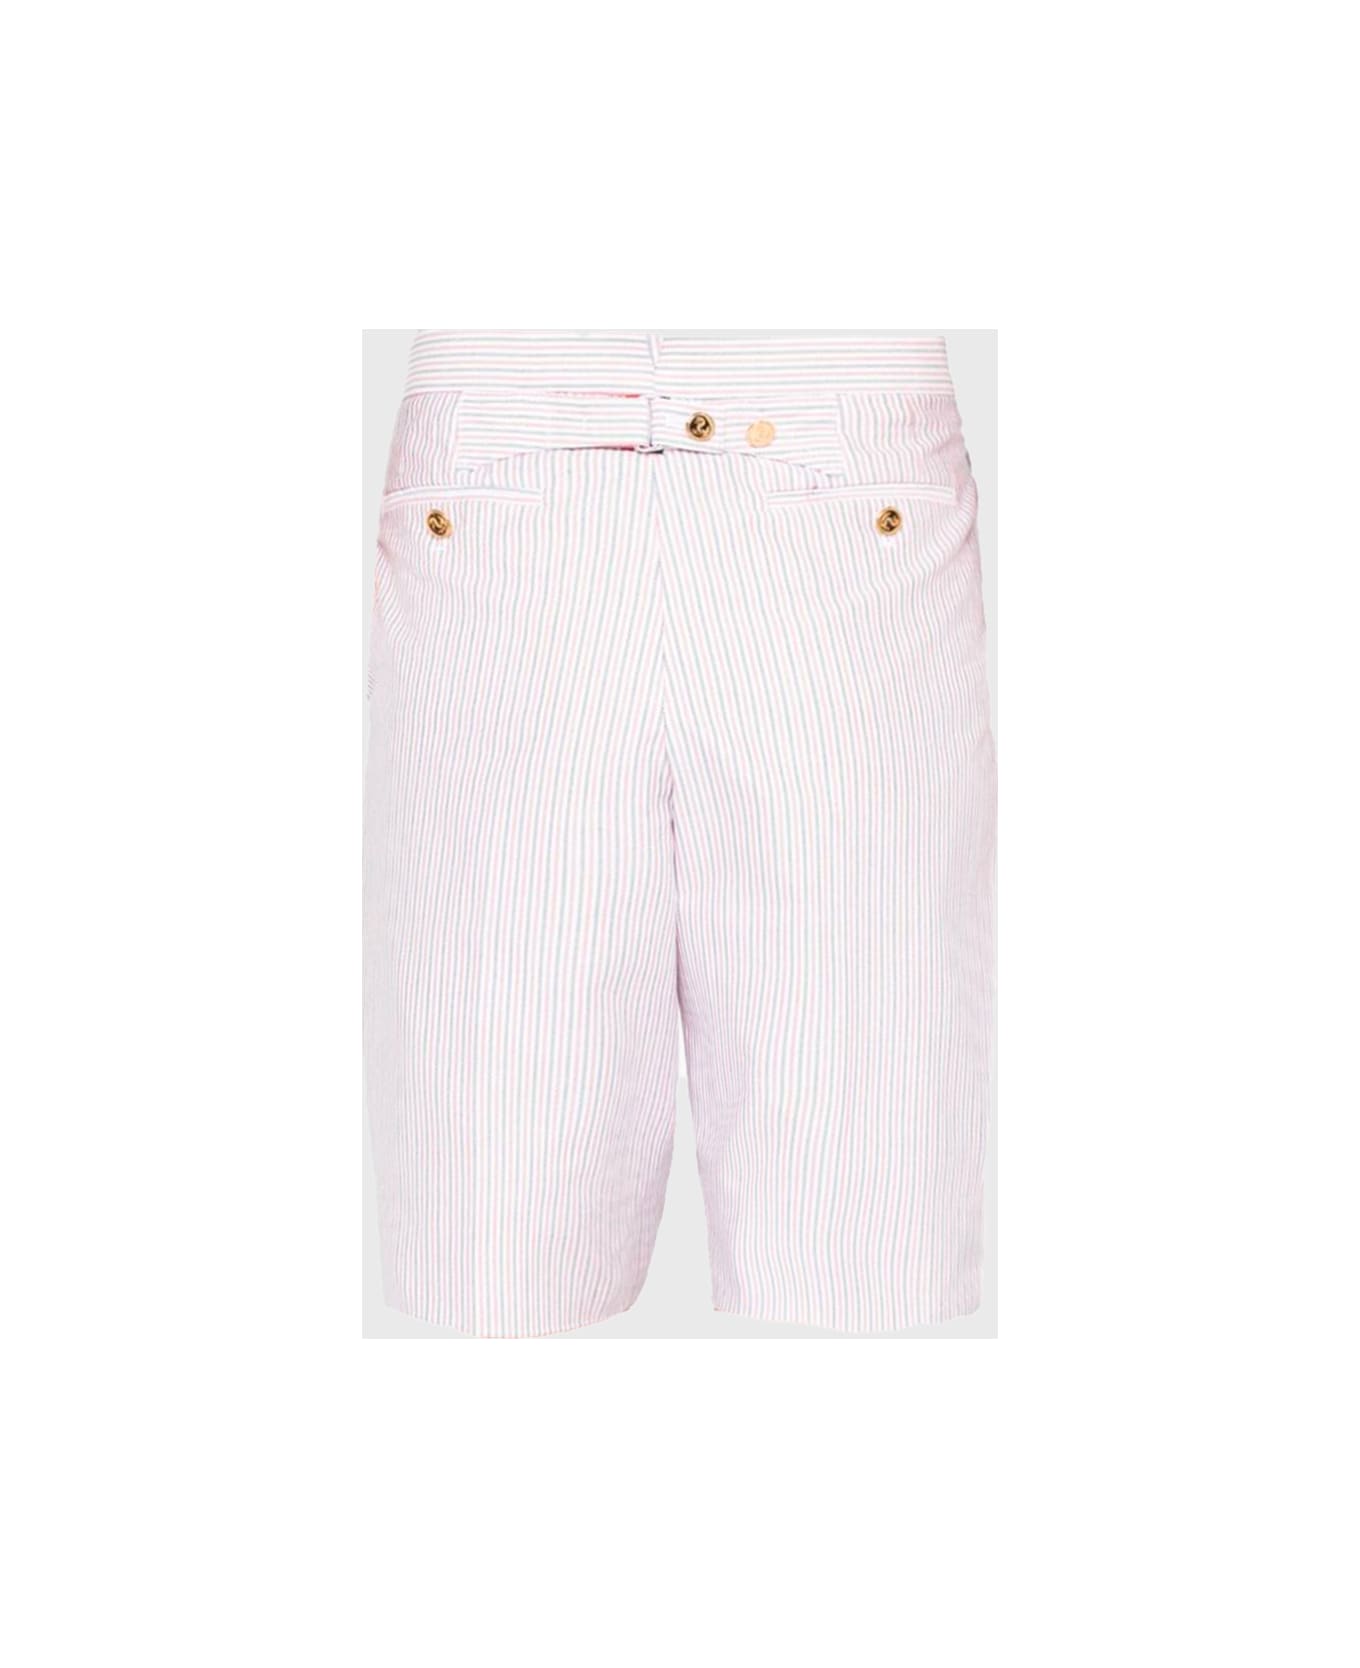 Thom Browne Multicolor Cotton Short - Red